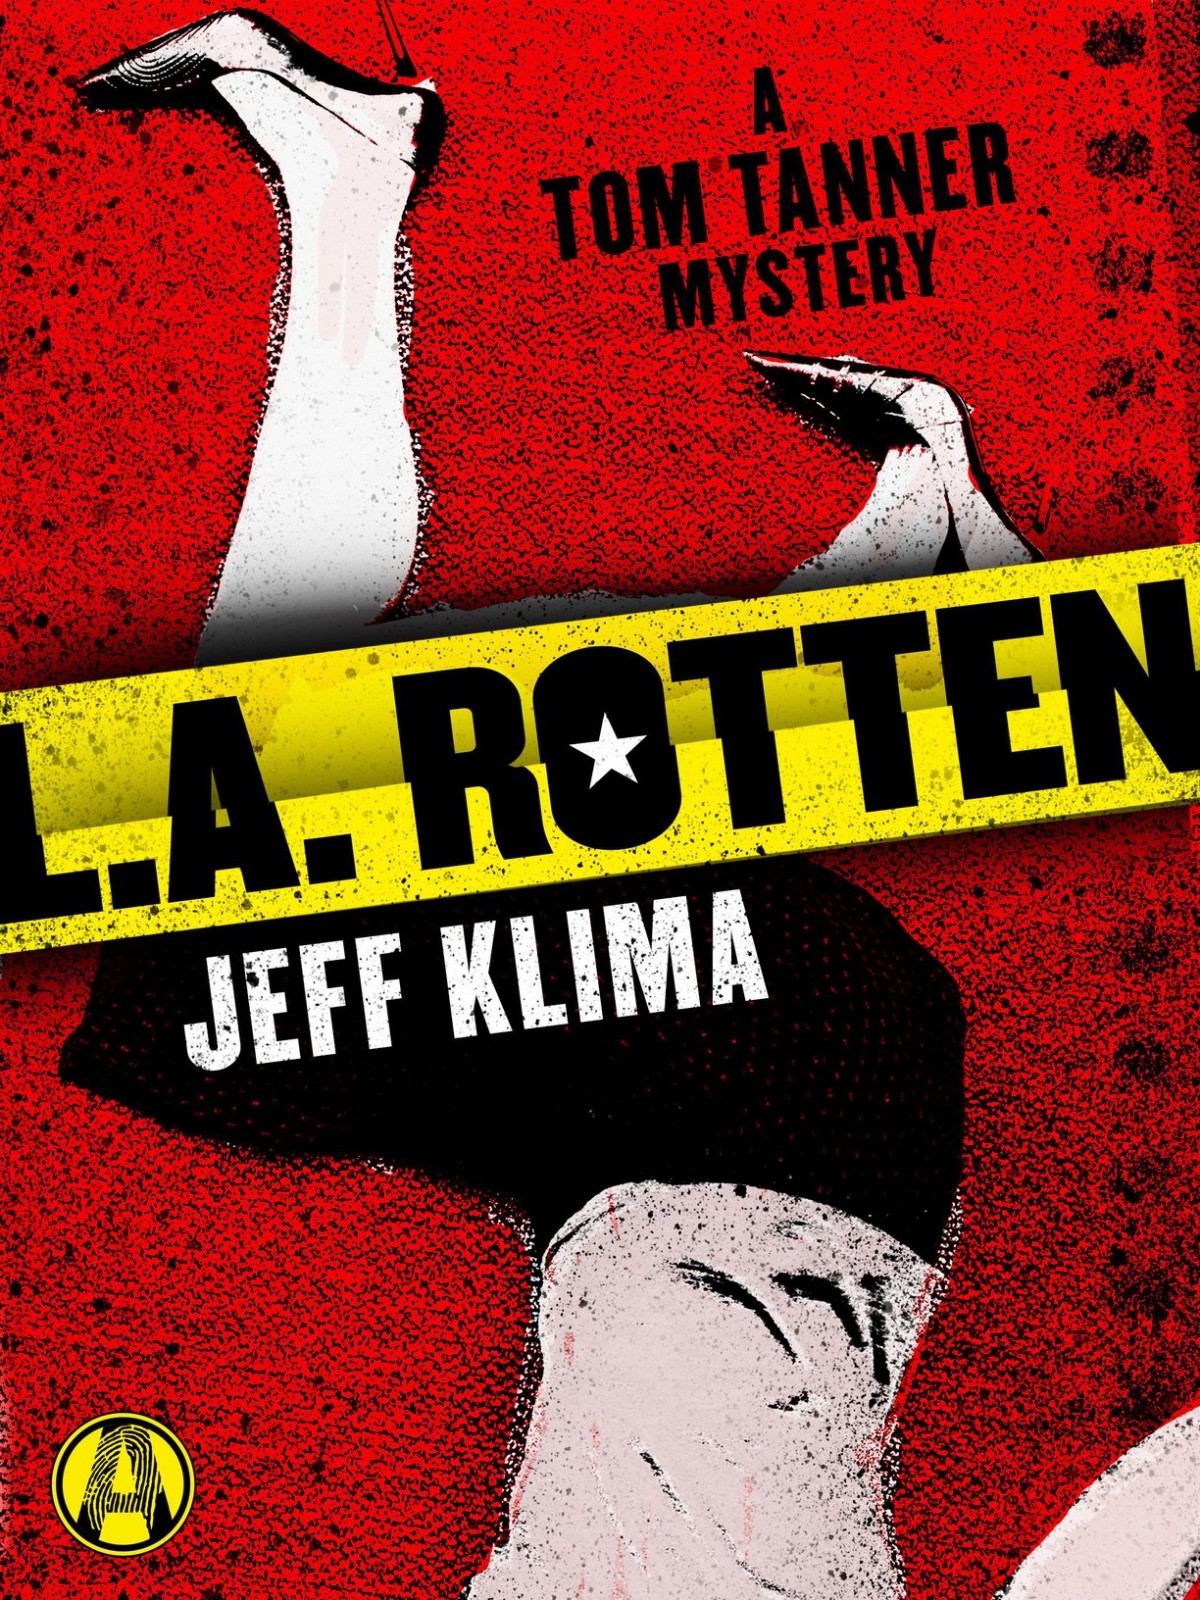 L.A. Rotten: A Tom Tanner Mystery